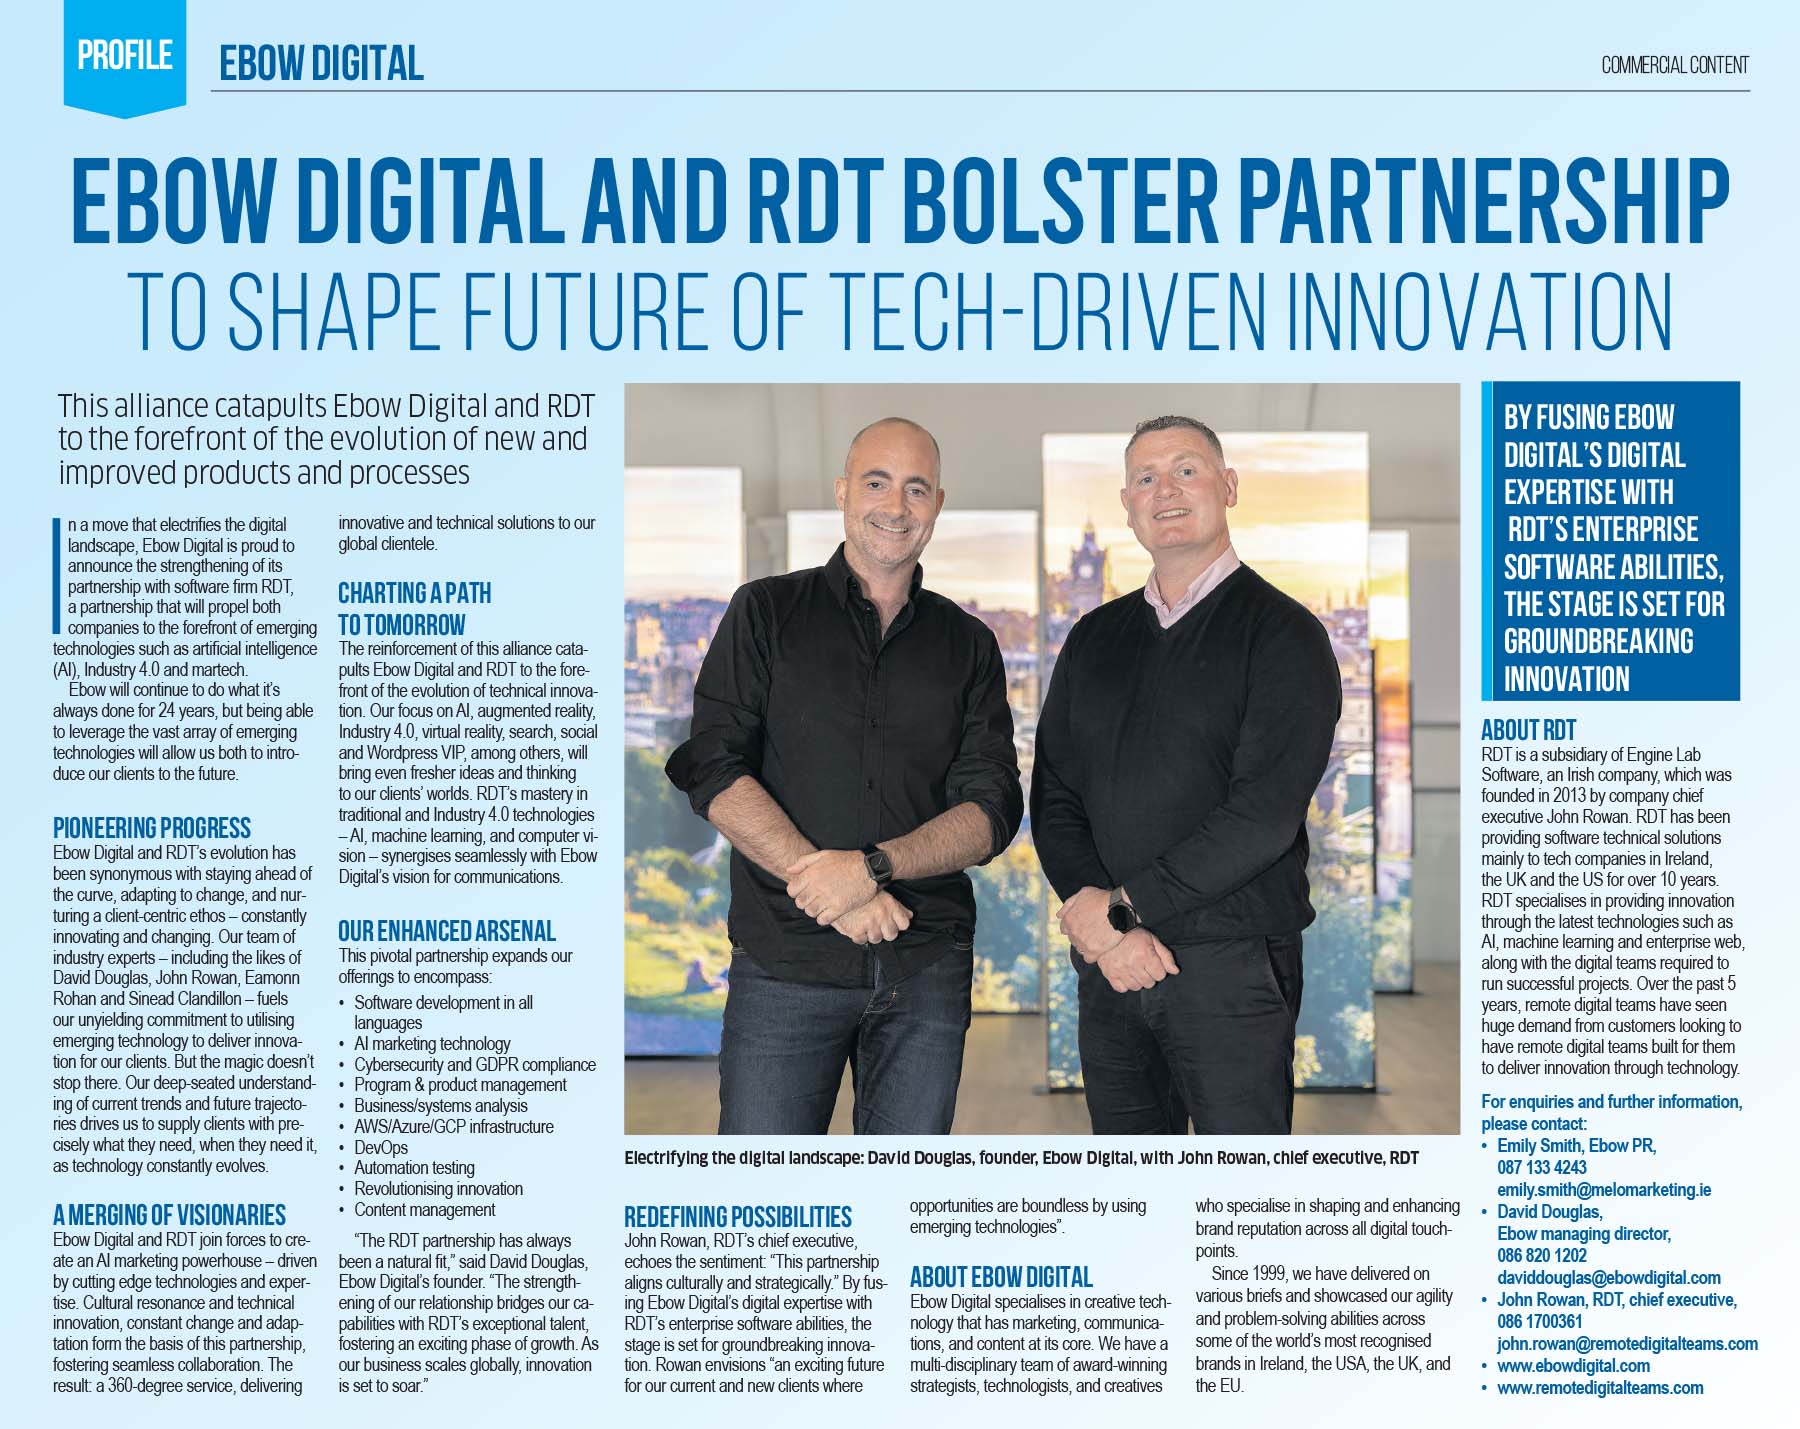 Ebow Digital and RDT announce their partnership "to shape future of tech-driven innovation" in the Business Post.